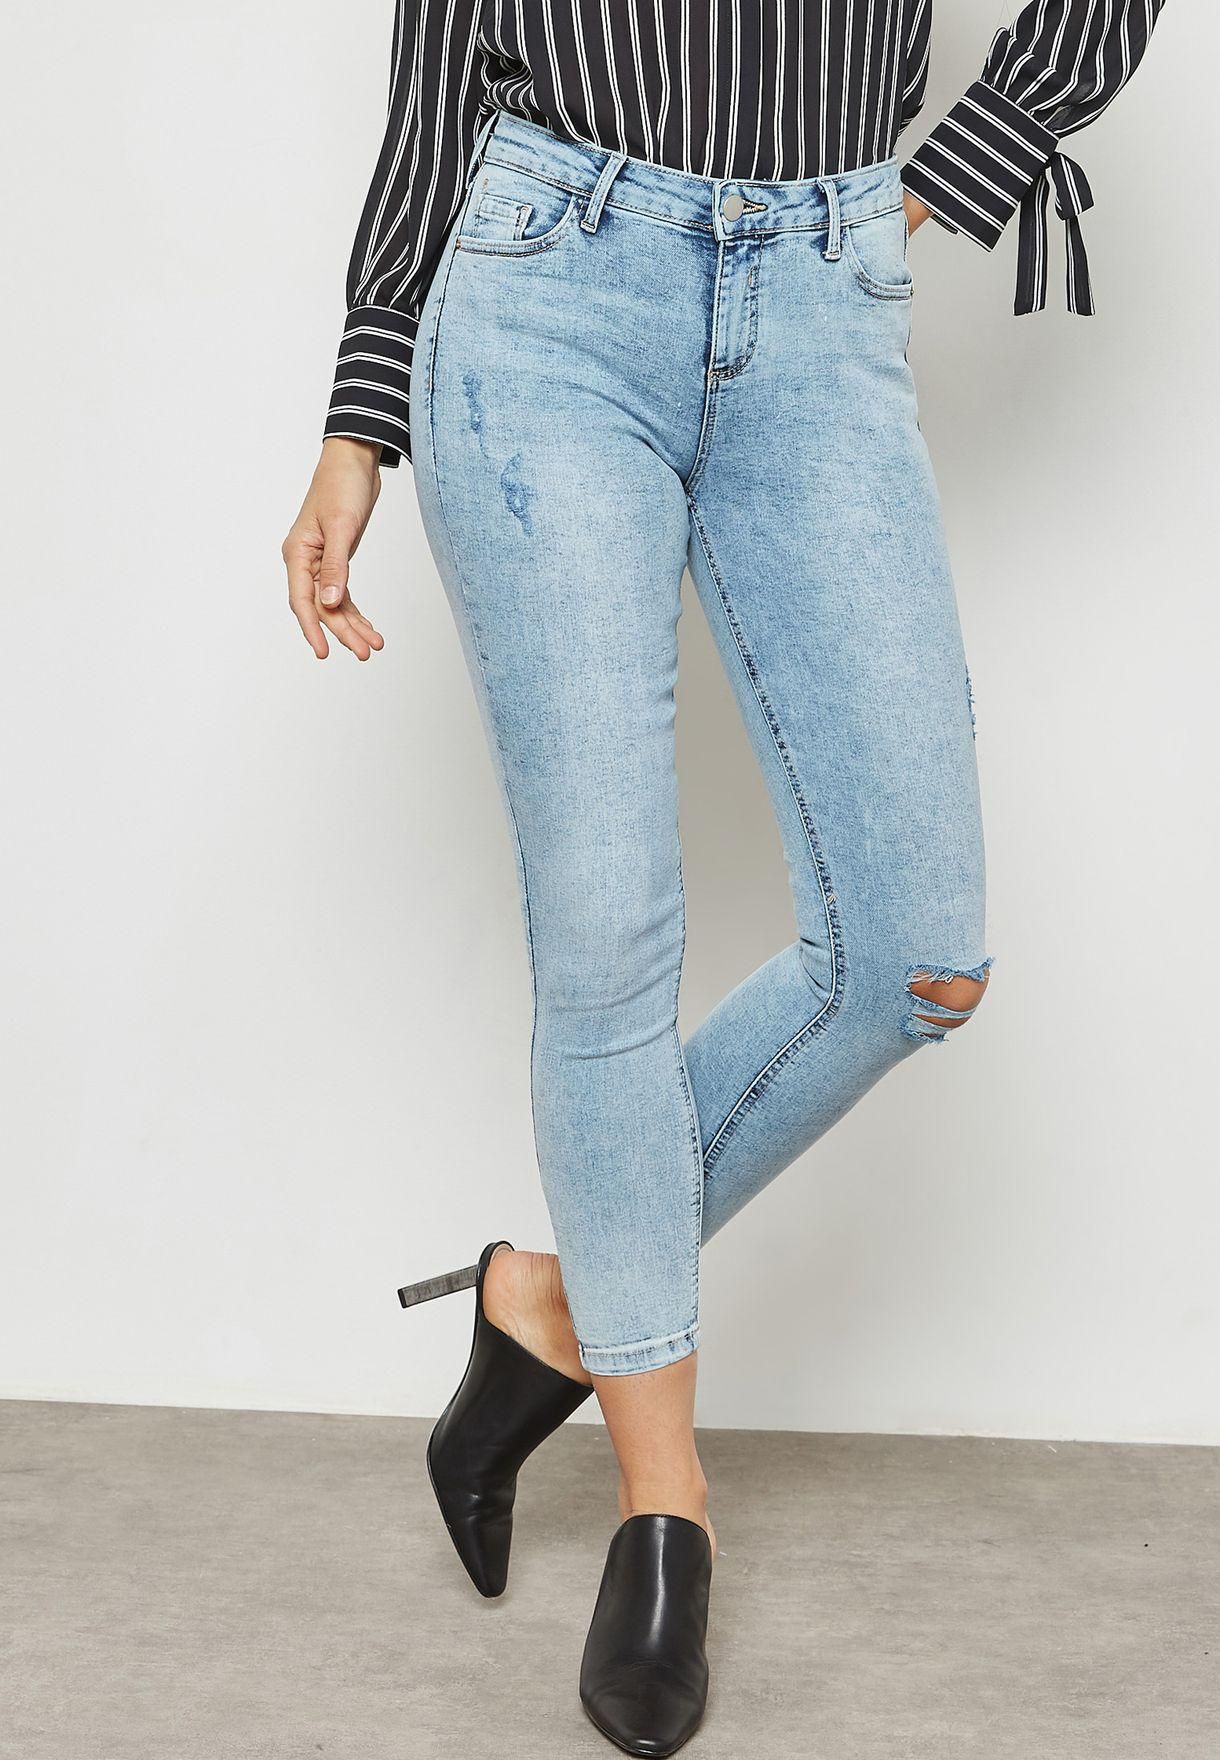 Ankle Grazer Ripped Skinny Jeans